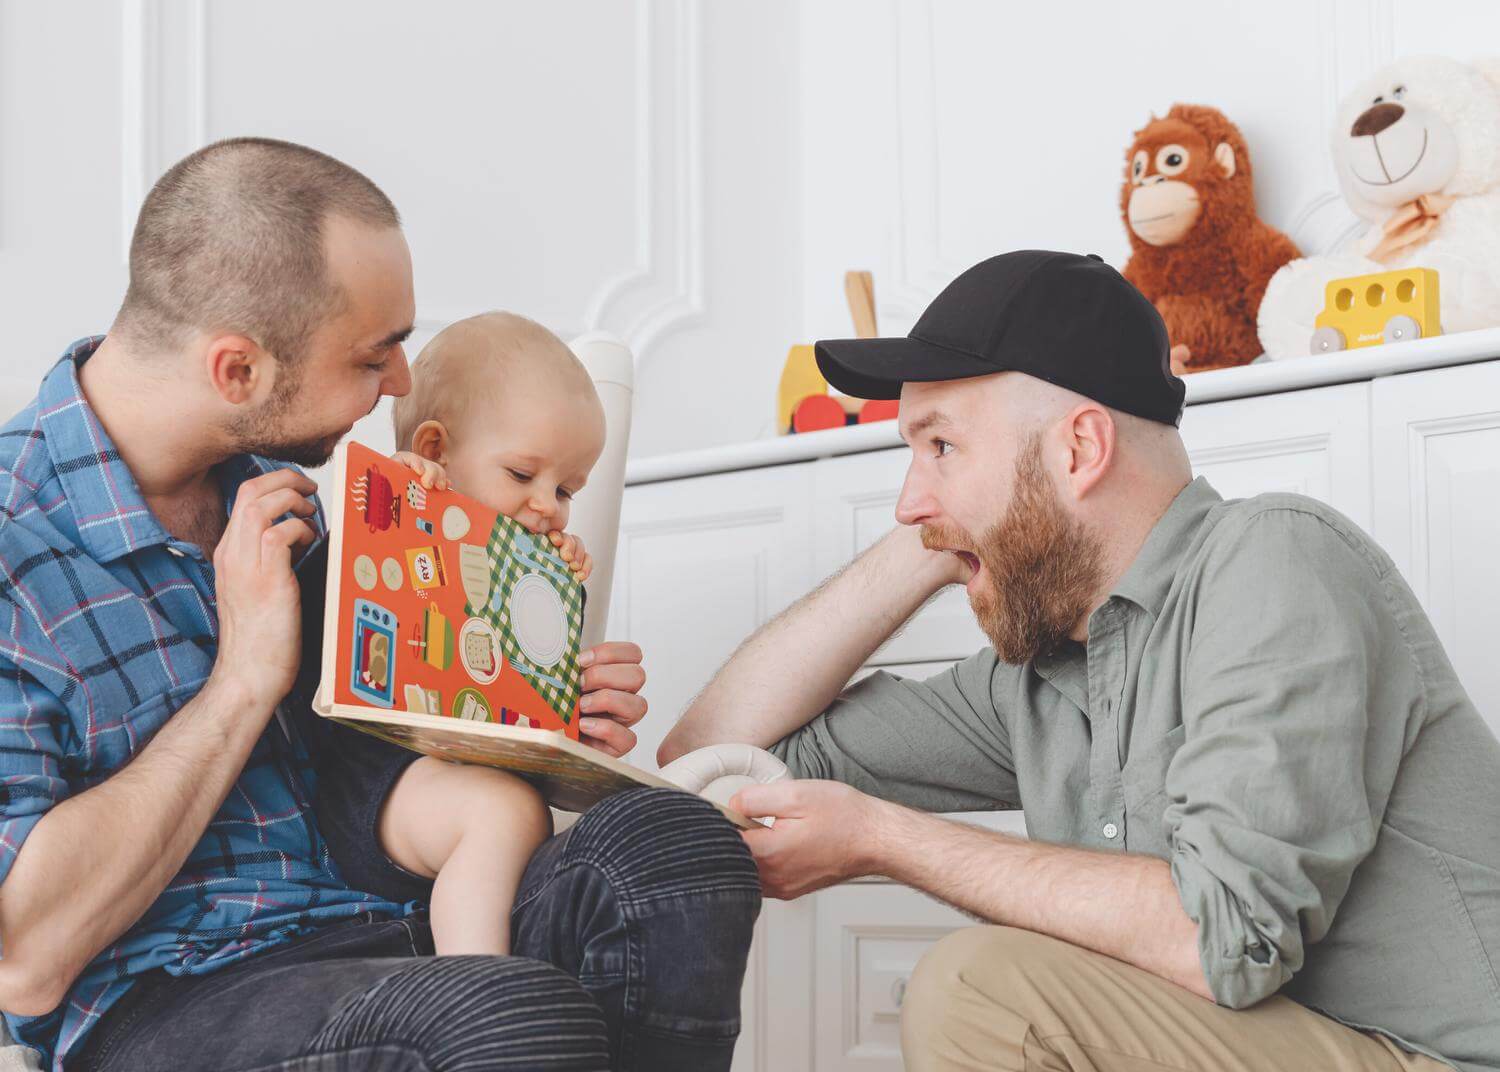 Two men smile and look on as a baby opens and peers into a book